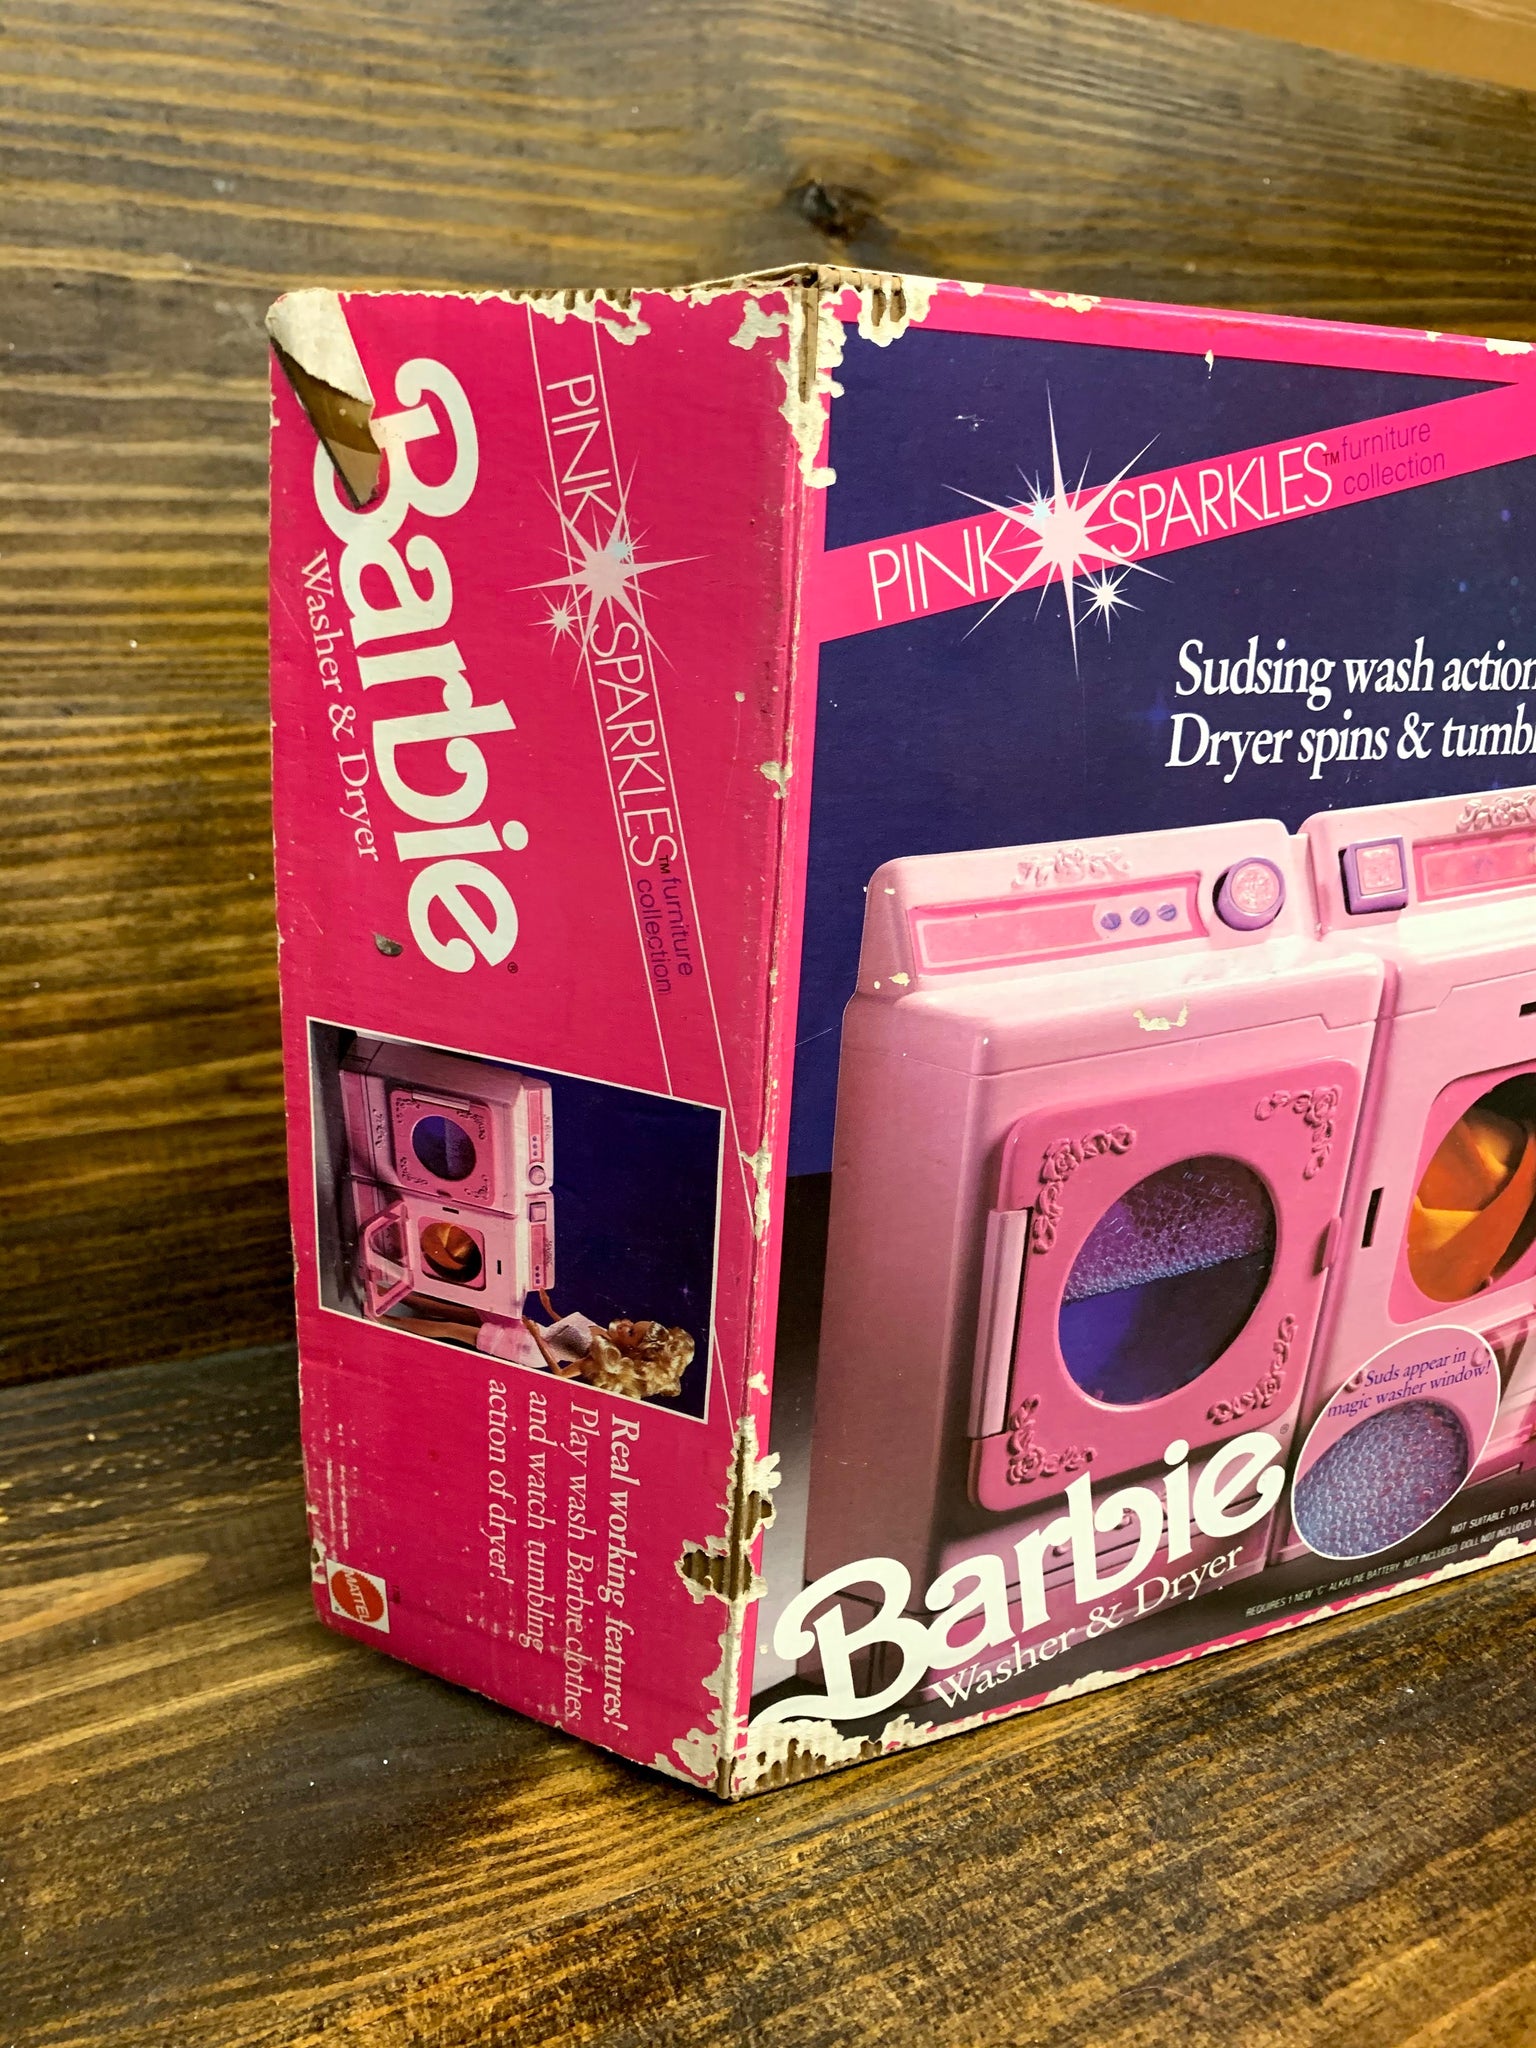 Barbie Washer And Dryer FOR SALE! - PicClick